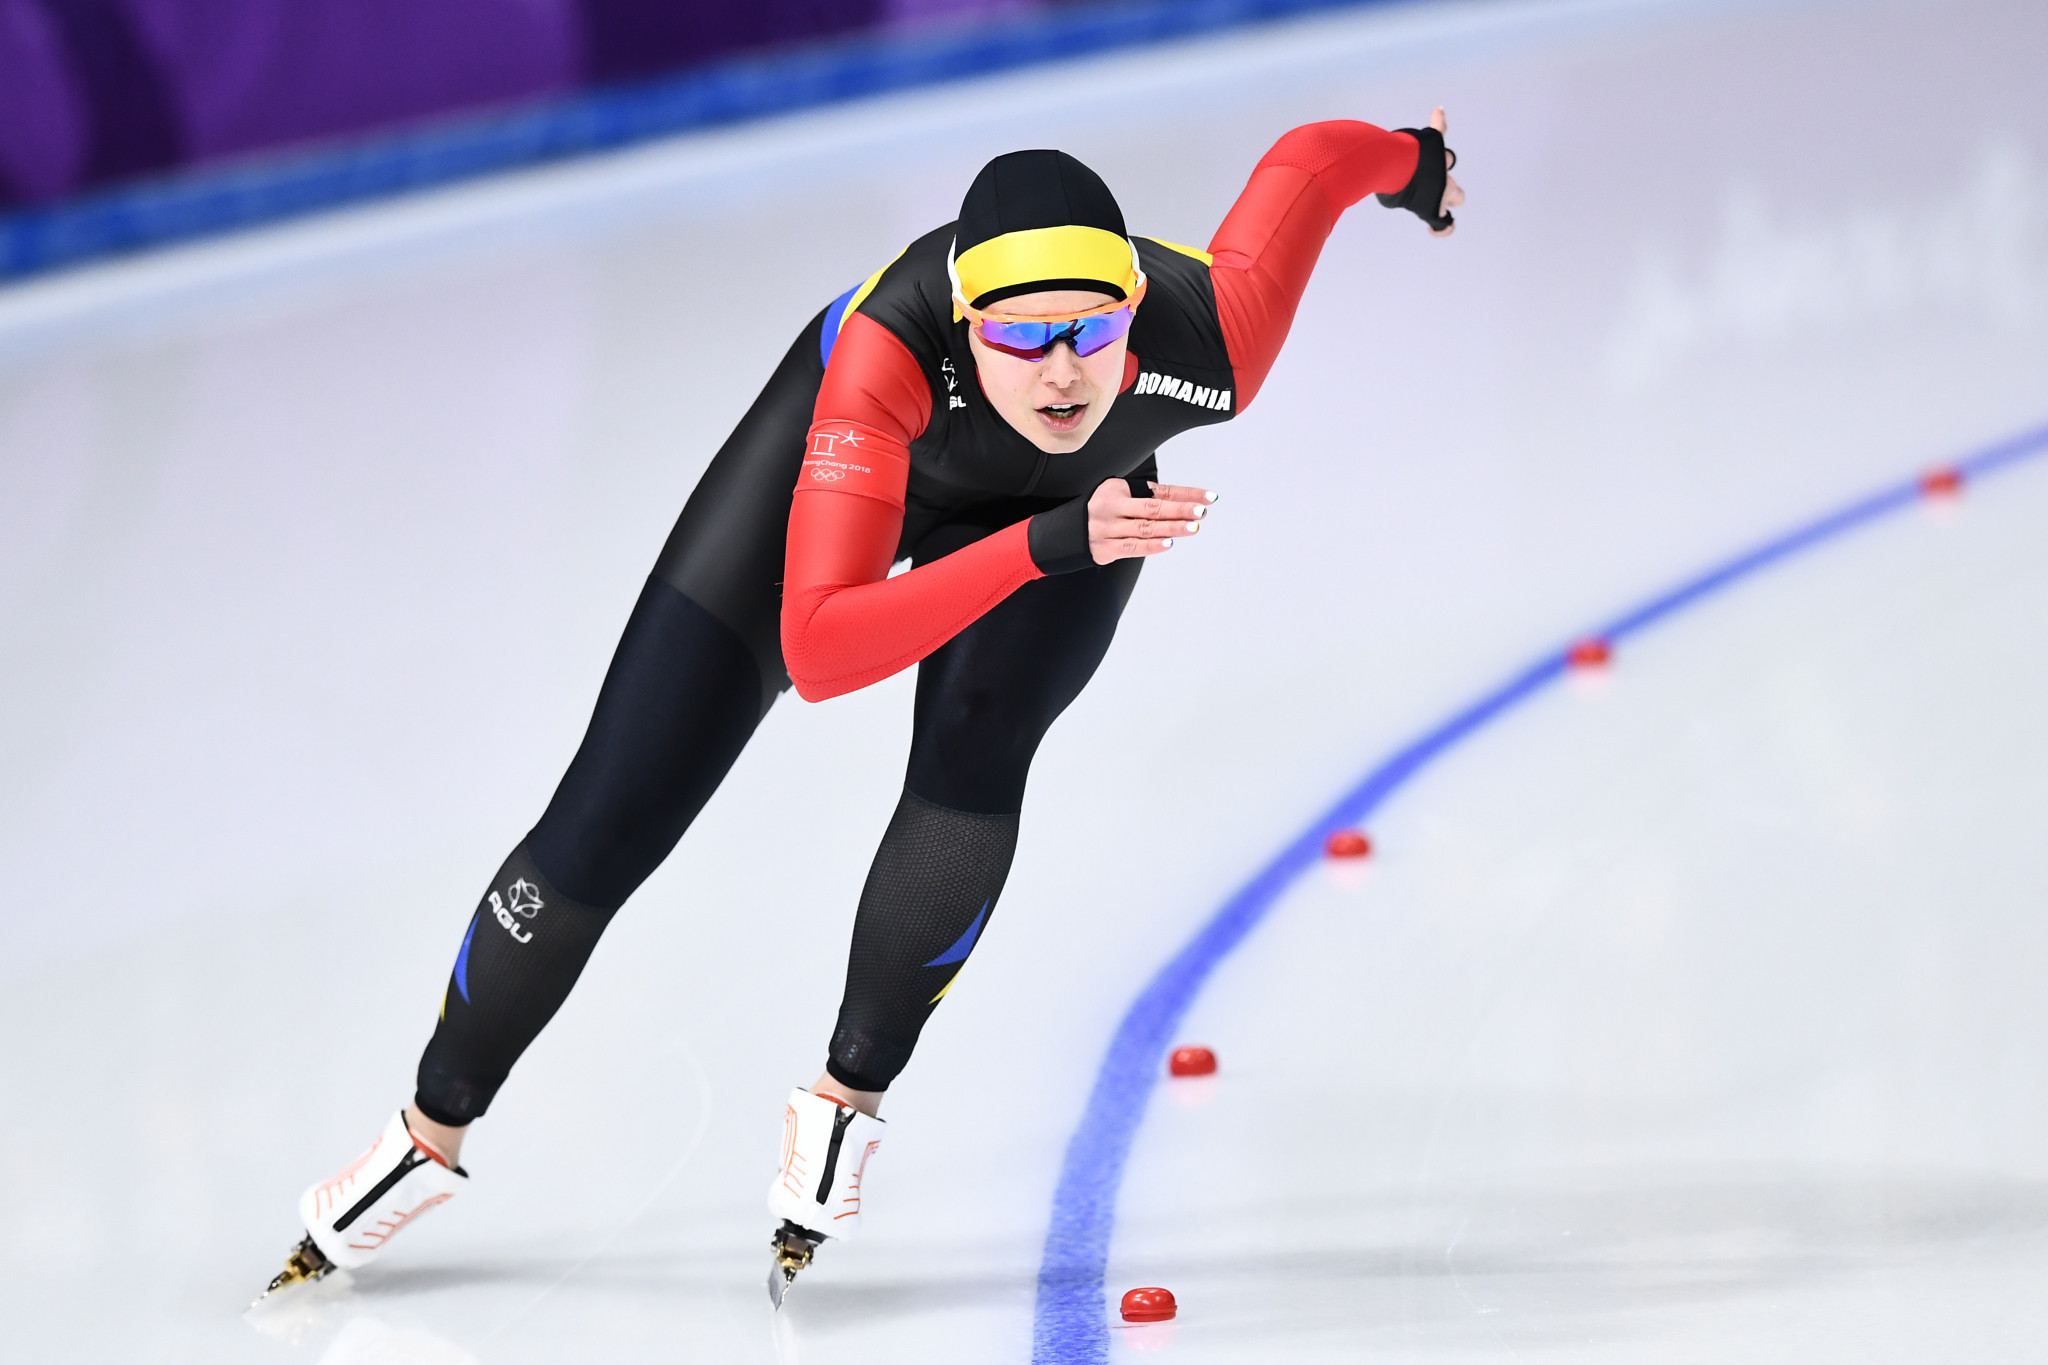 Romanian speed skater Ianculescu to move to The Netherlands for training